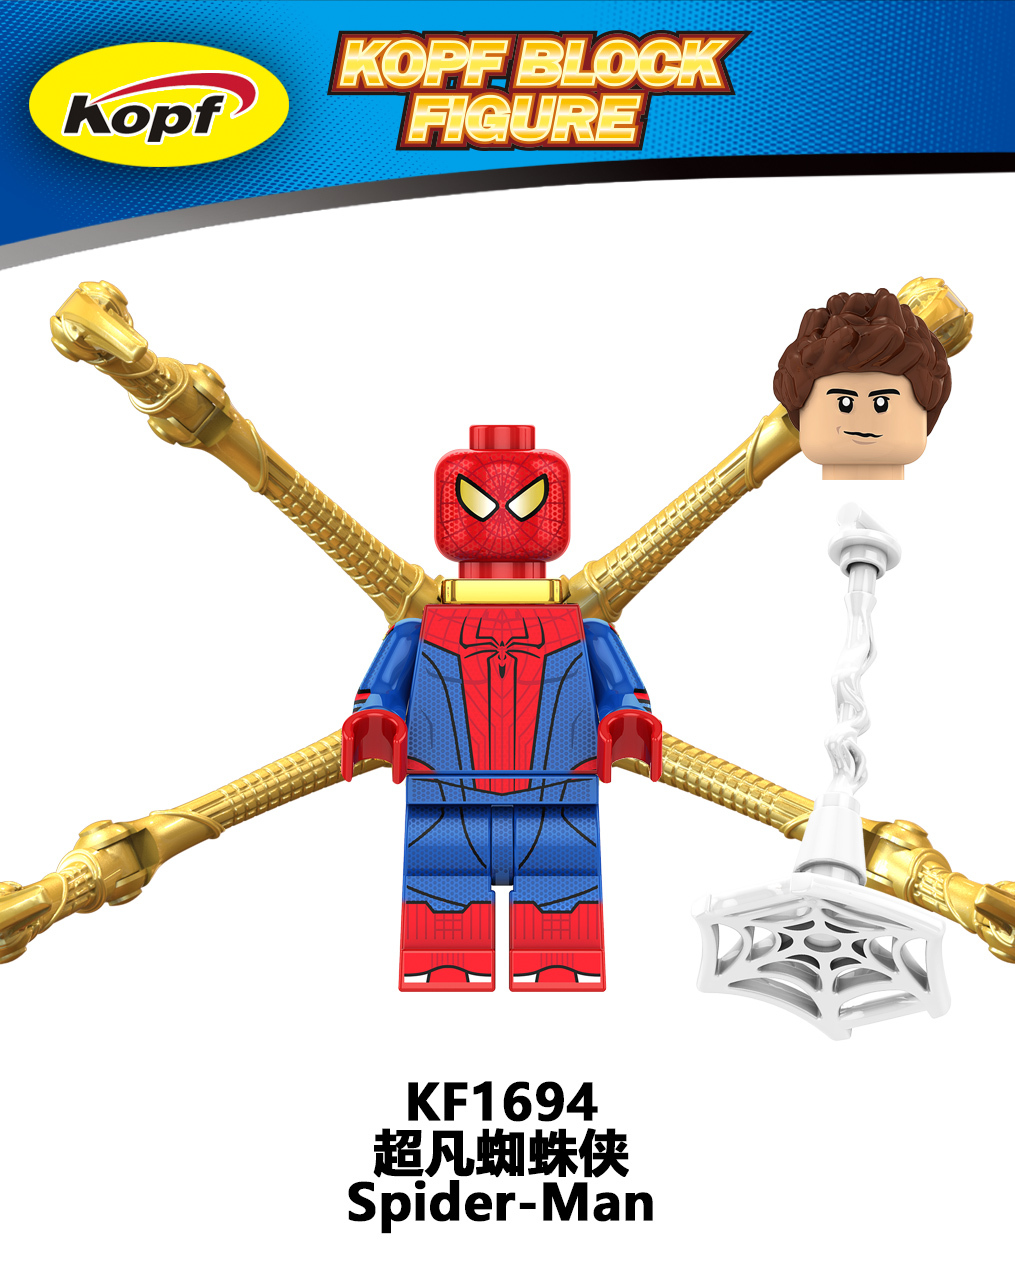 KF6159 KF1693 KF1694 KF1695 KF1696 KF1697 KF1698 KF1699 KF1700 Super Heroes Mini Building Spiderman Green Goblin Blocks Action Figures Educational Toys For Kids Gifts 